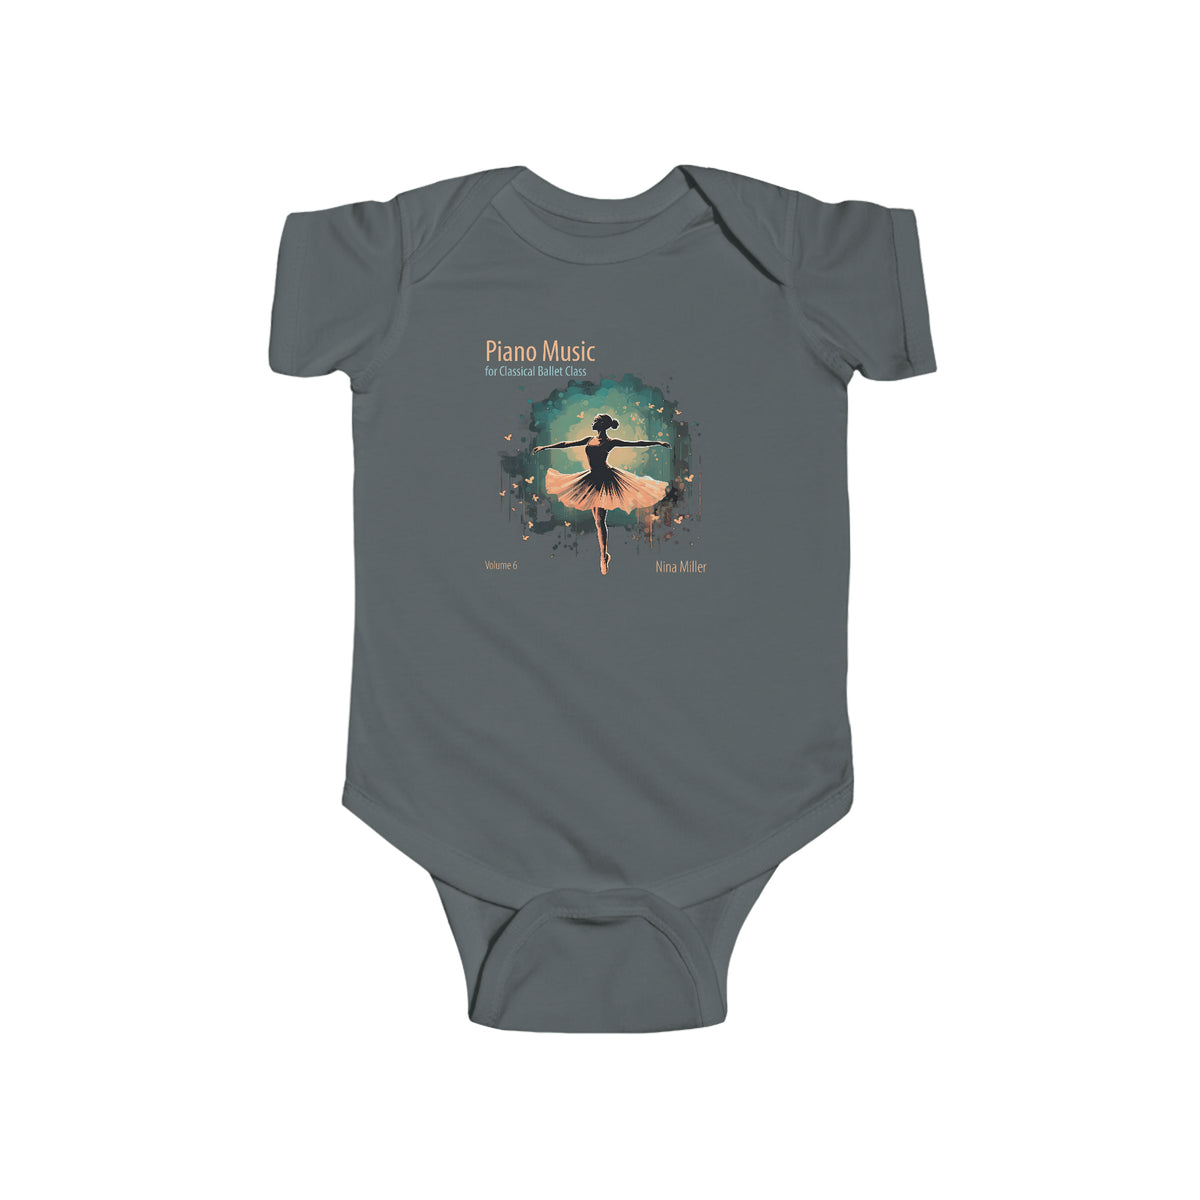 Piano Music for Classical Ballet Class Vol. 6 - Infant Fine Jersey Bodysuit